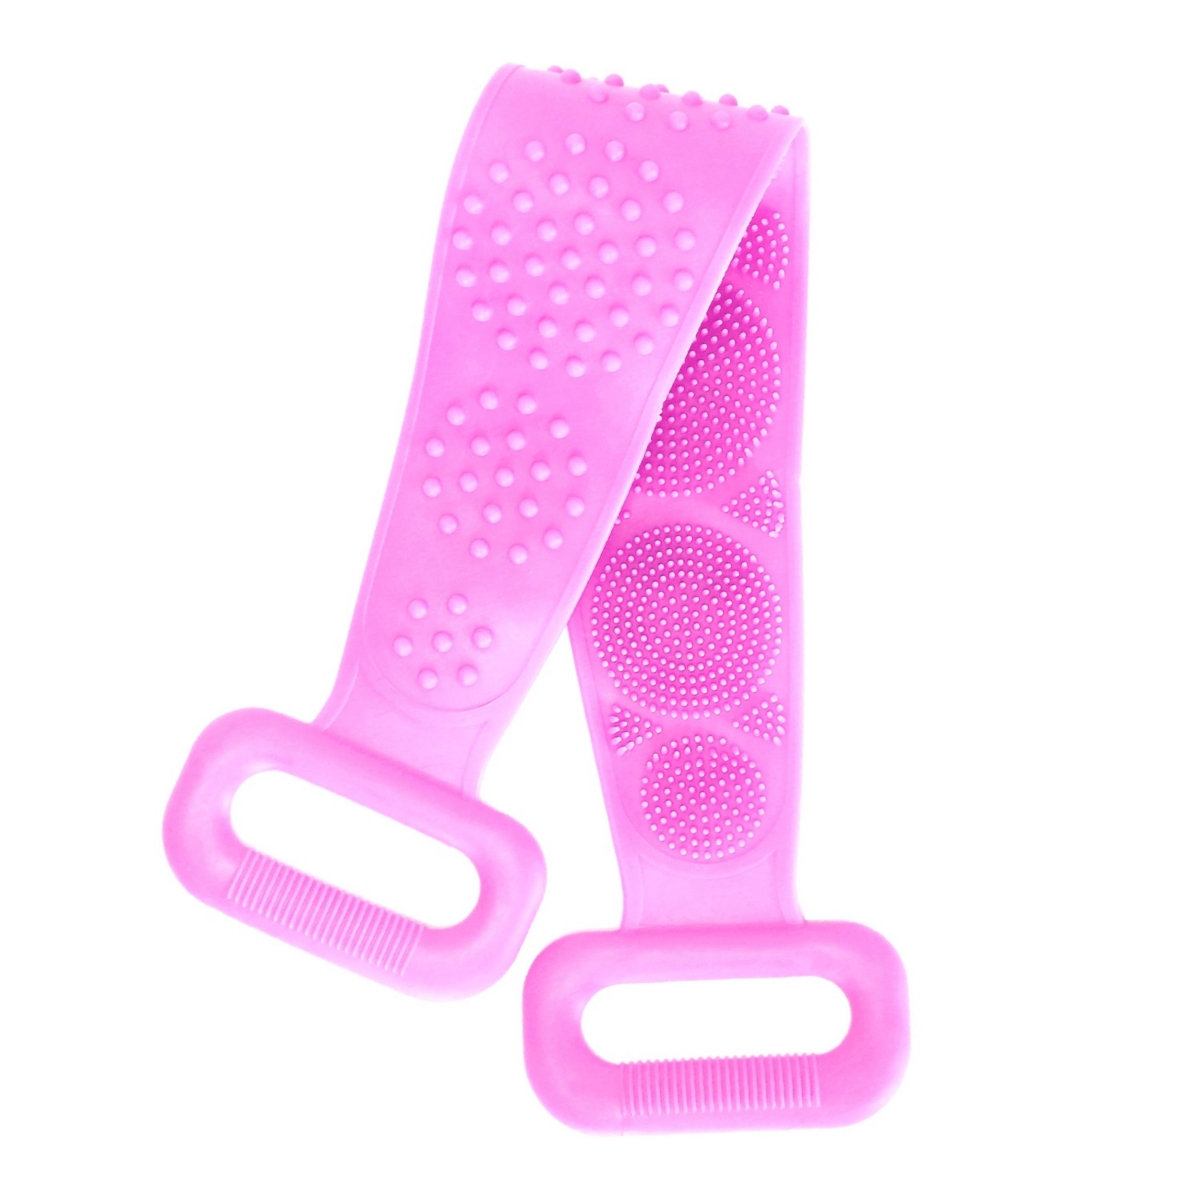 Picture of Fresh Fab Finds FFF-Purple-GPCT2509 Exfoliating Silicone Body Scrubber Belt with Massage Dots - Shower Strap Brush with Adhesive Hook